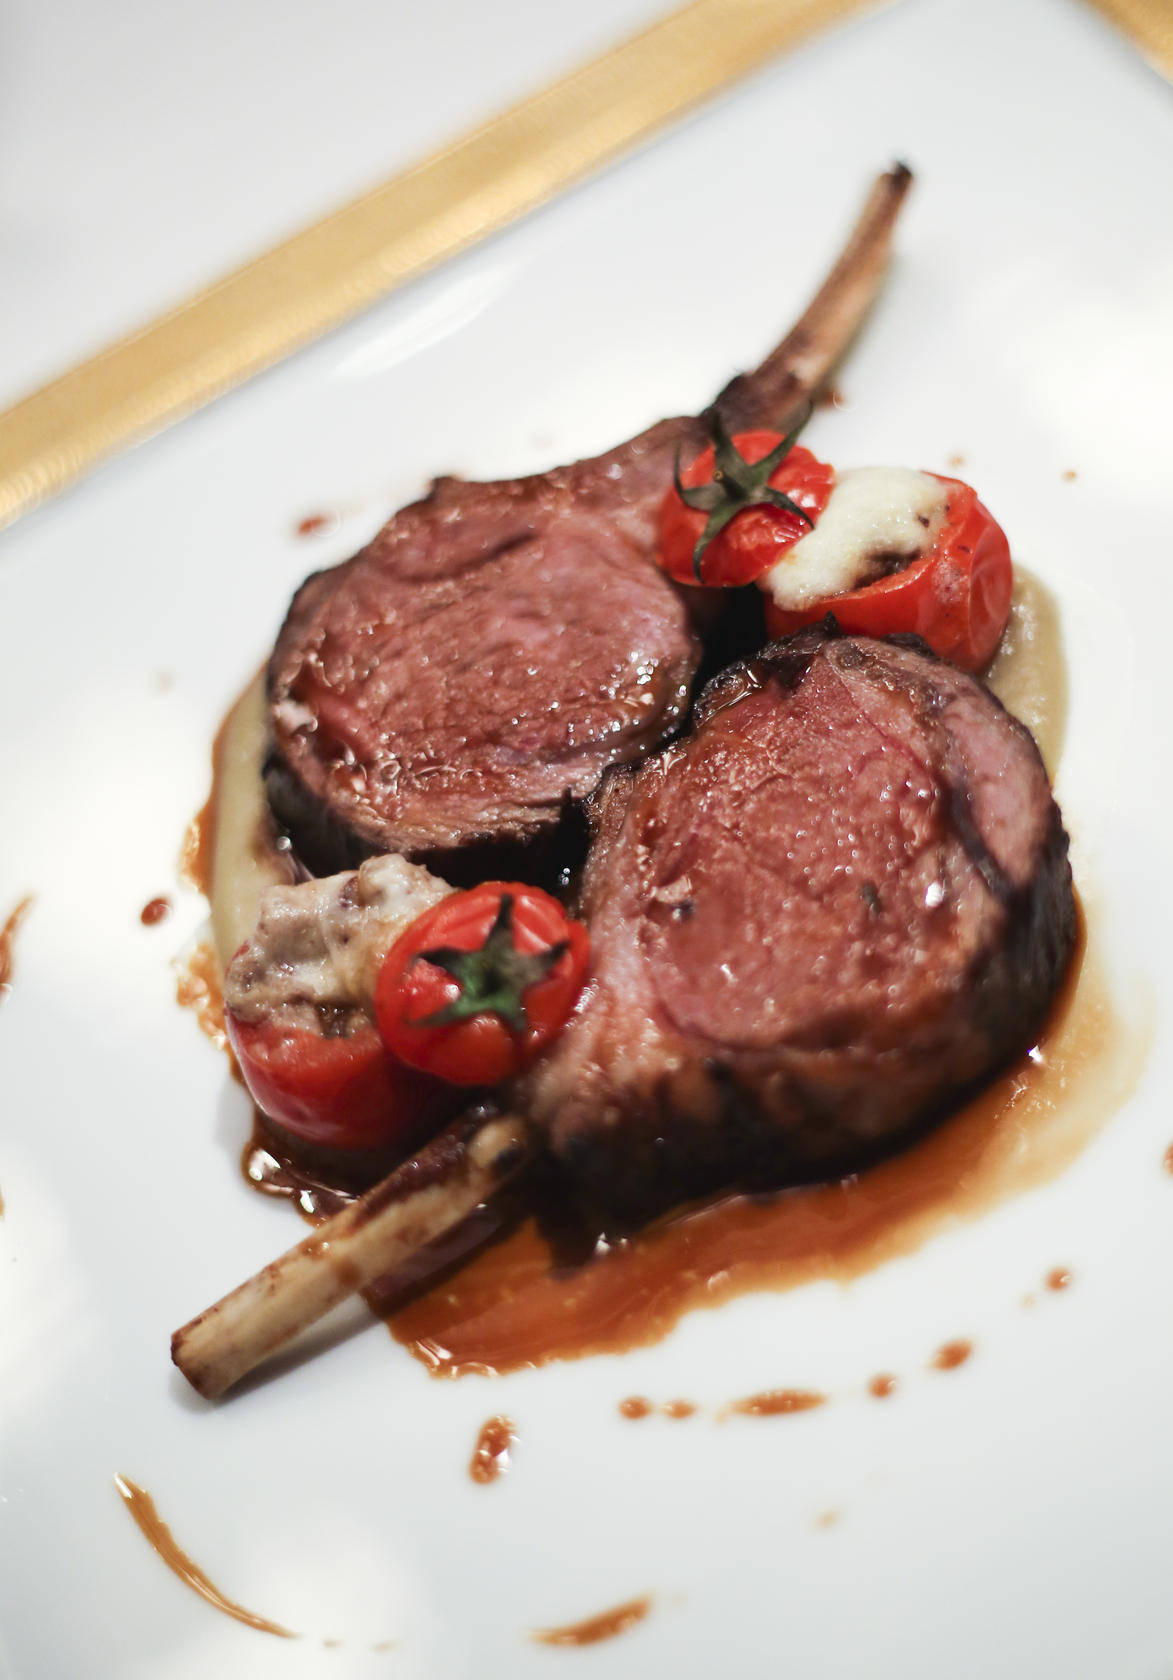 Lamb chops with stuffed cherry tomatoes from Don Alfonso 1890 at the Grand Lisboa.